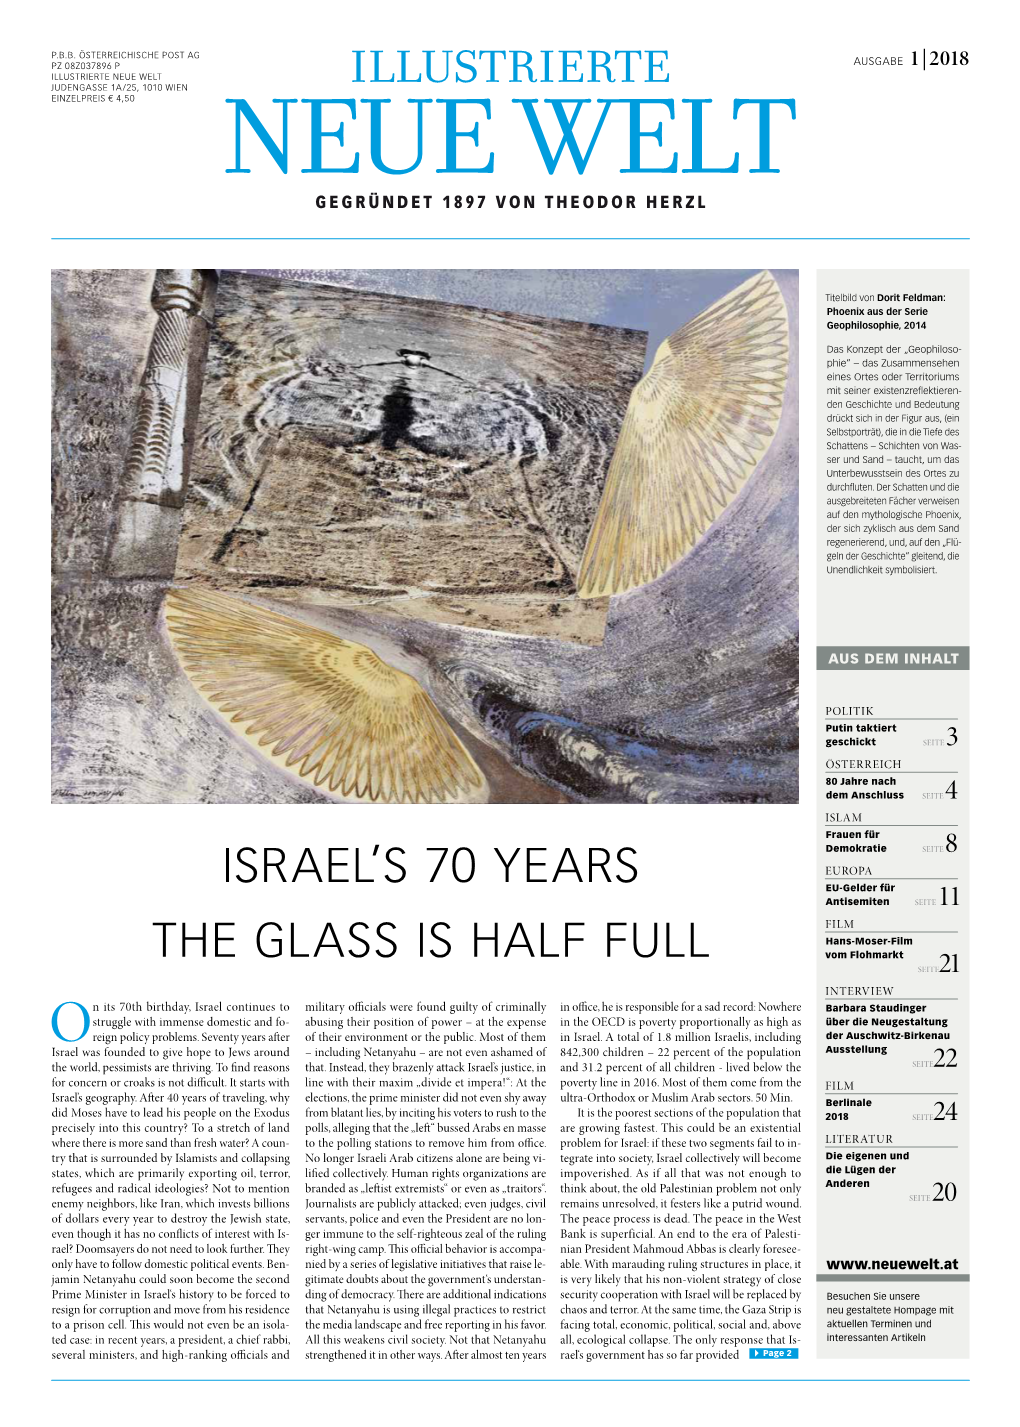 Israel's 70 Years the Glass Is Half Full